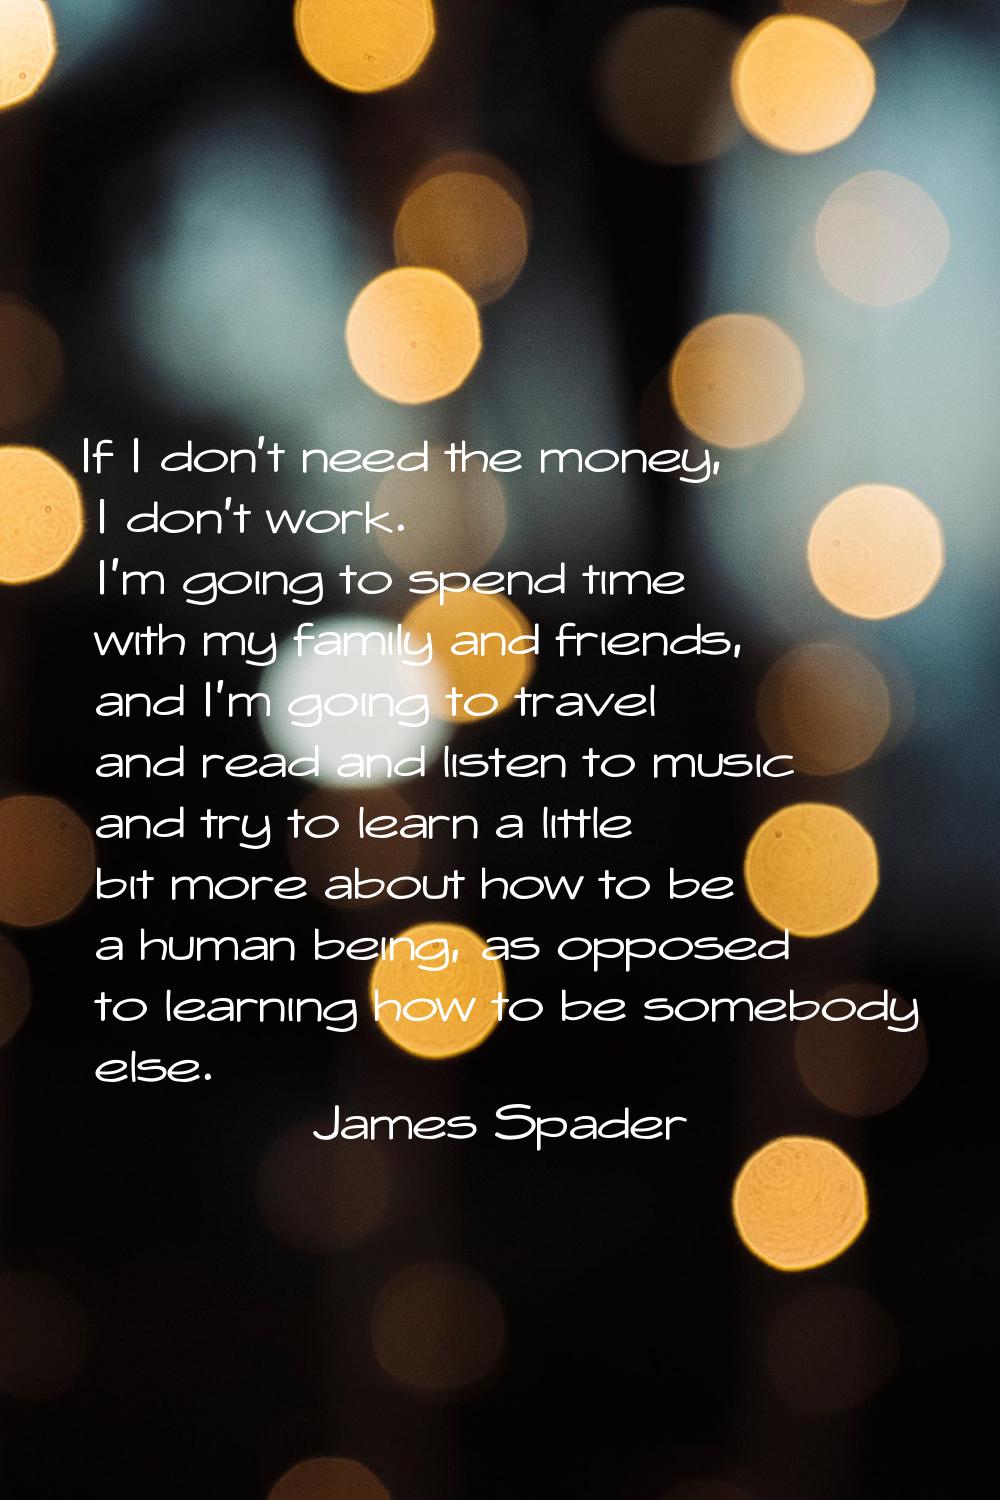 If I don't need the money, I don't work. I'm going to spend time with my family and friends, and I'